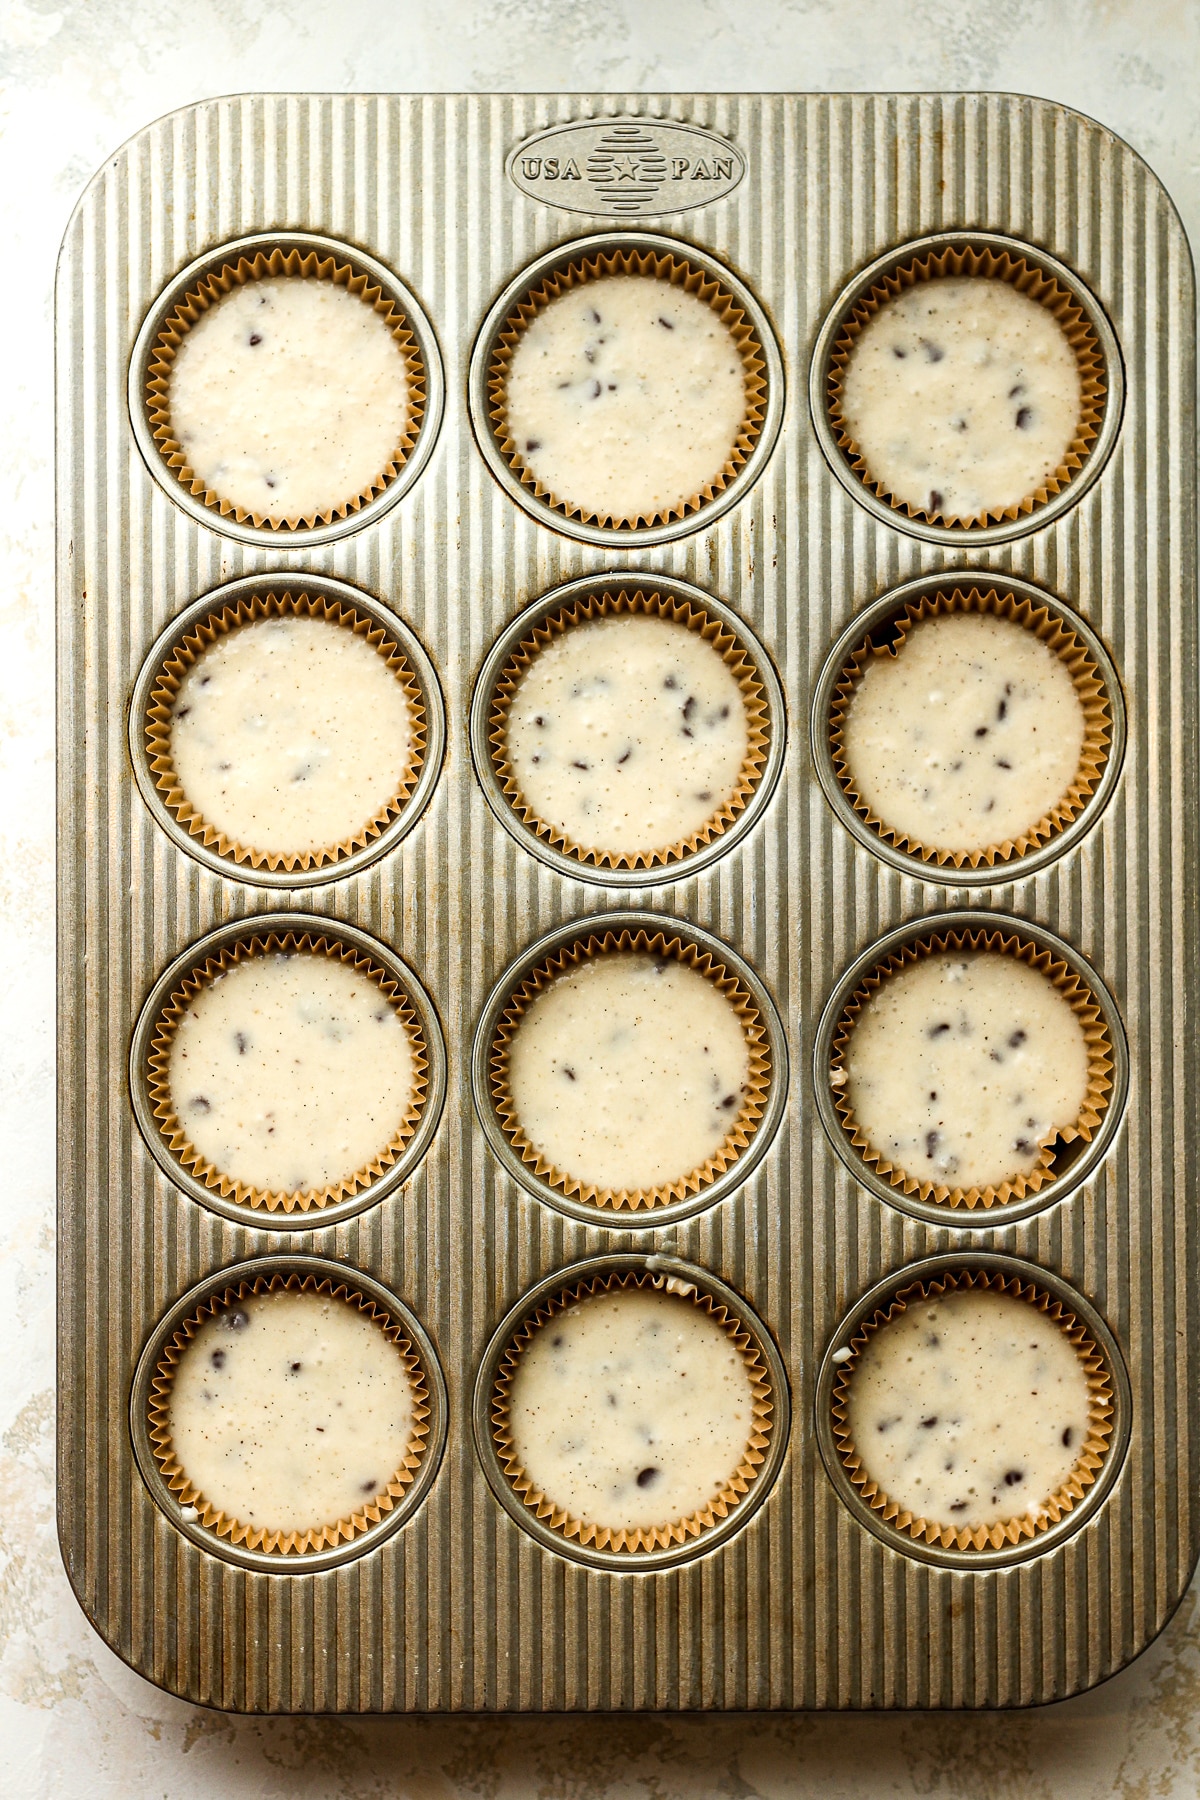 A muffin tin with liners filled with cupcake batter.